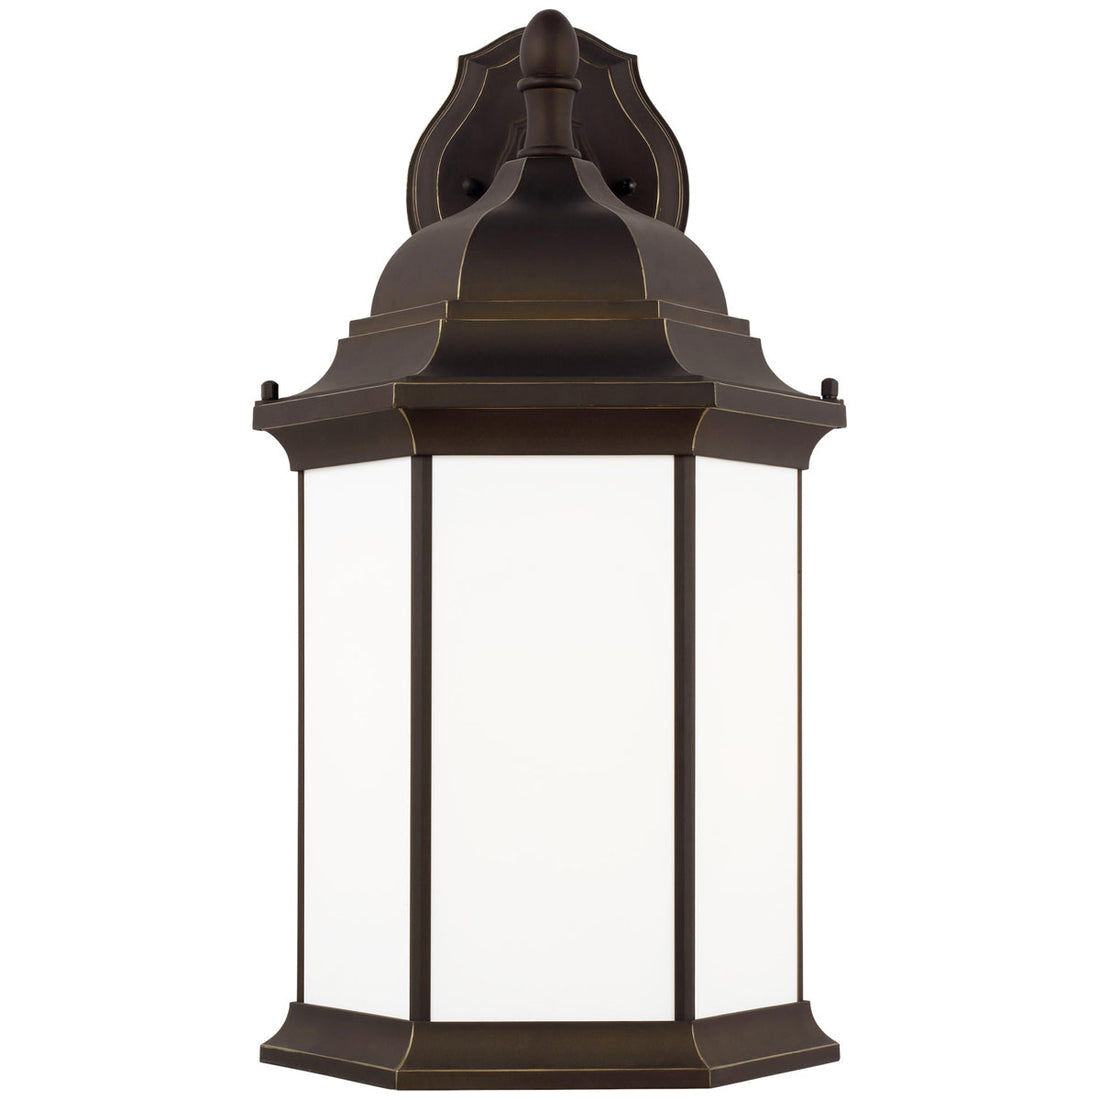 Sea Gull Lighting Sevier Downlight Outdoor Wall Lantern without Bulb